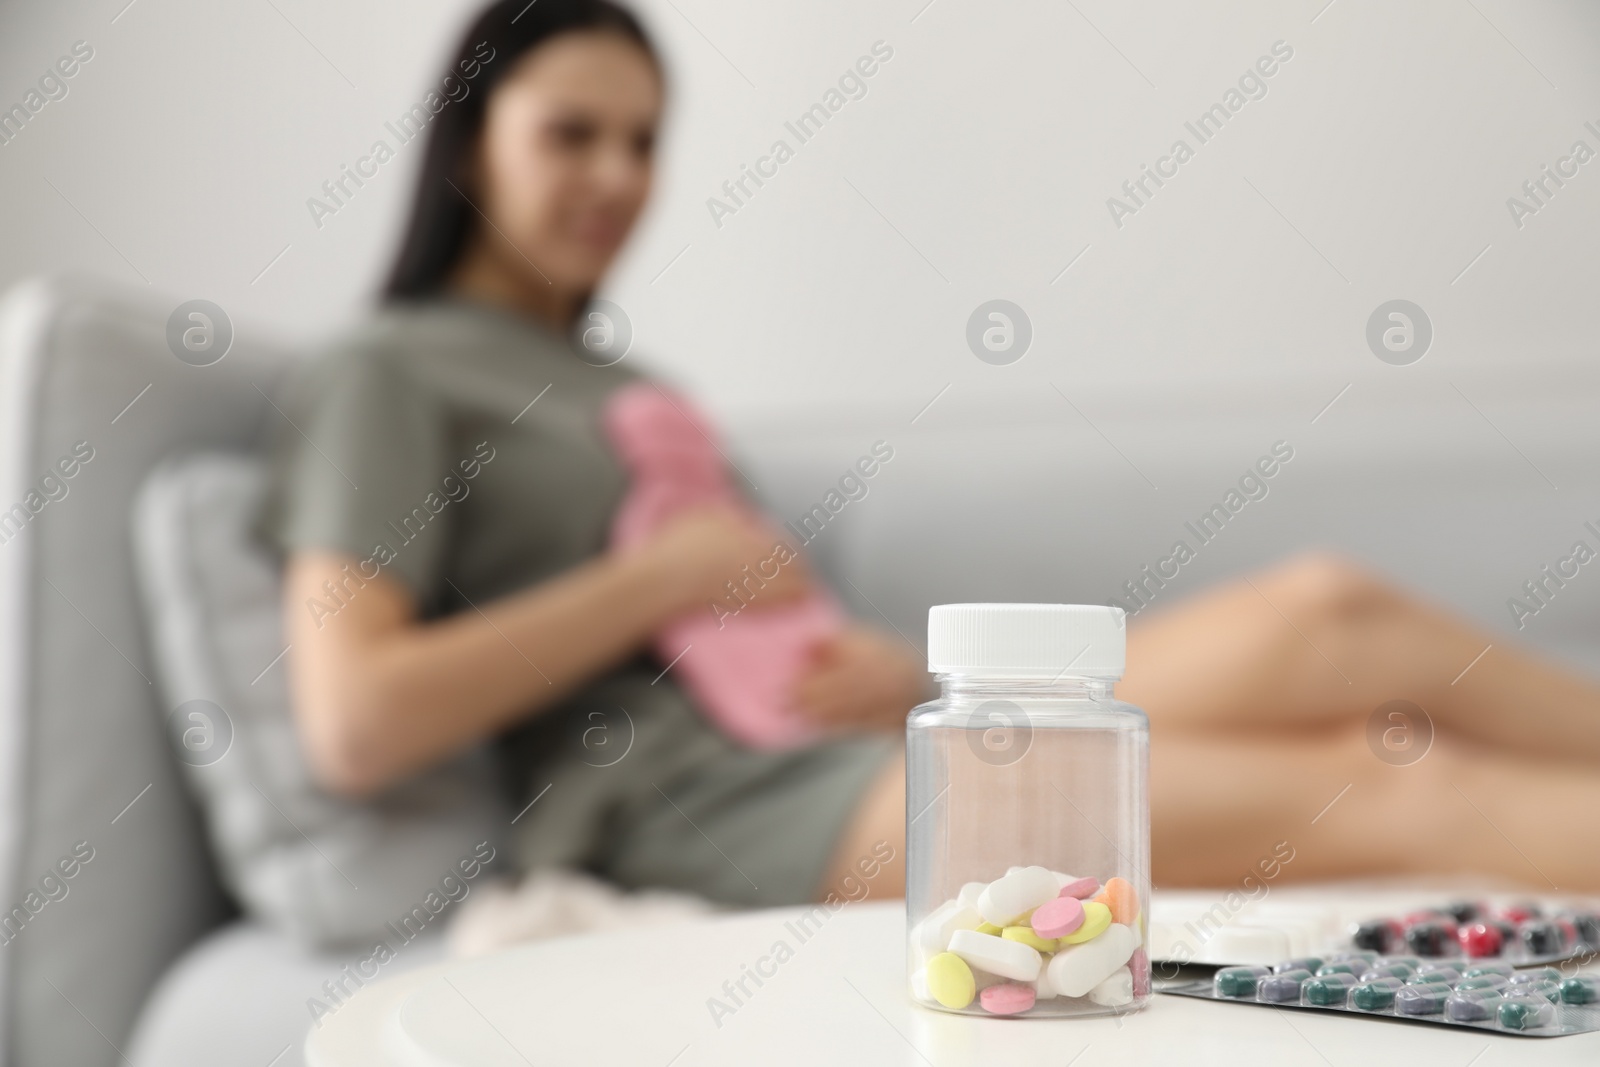 Photo of Woman using hot water bottle to relieve pain at home, focus on pills